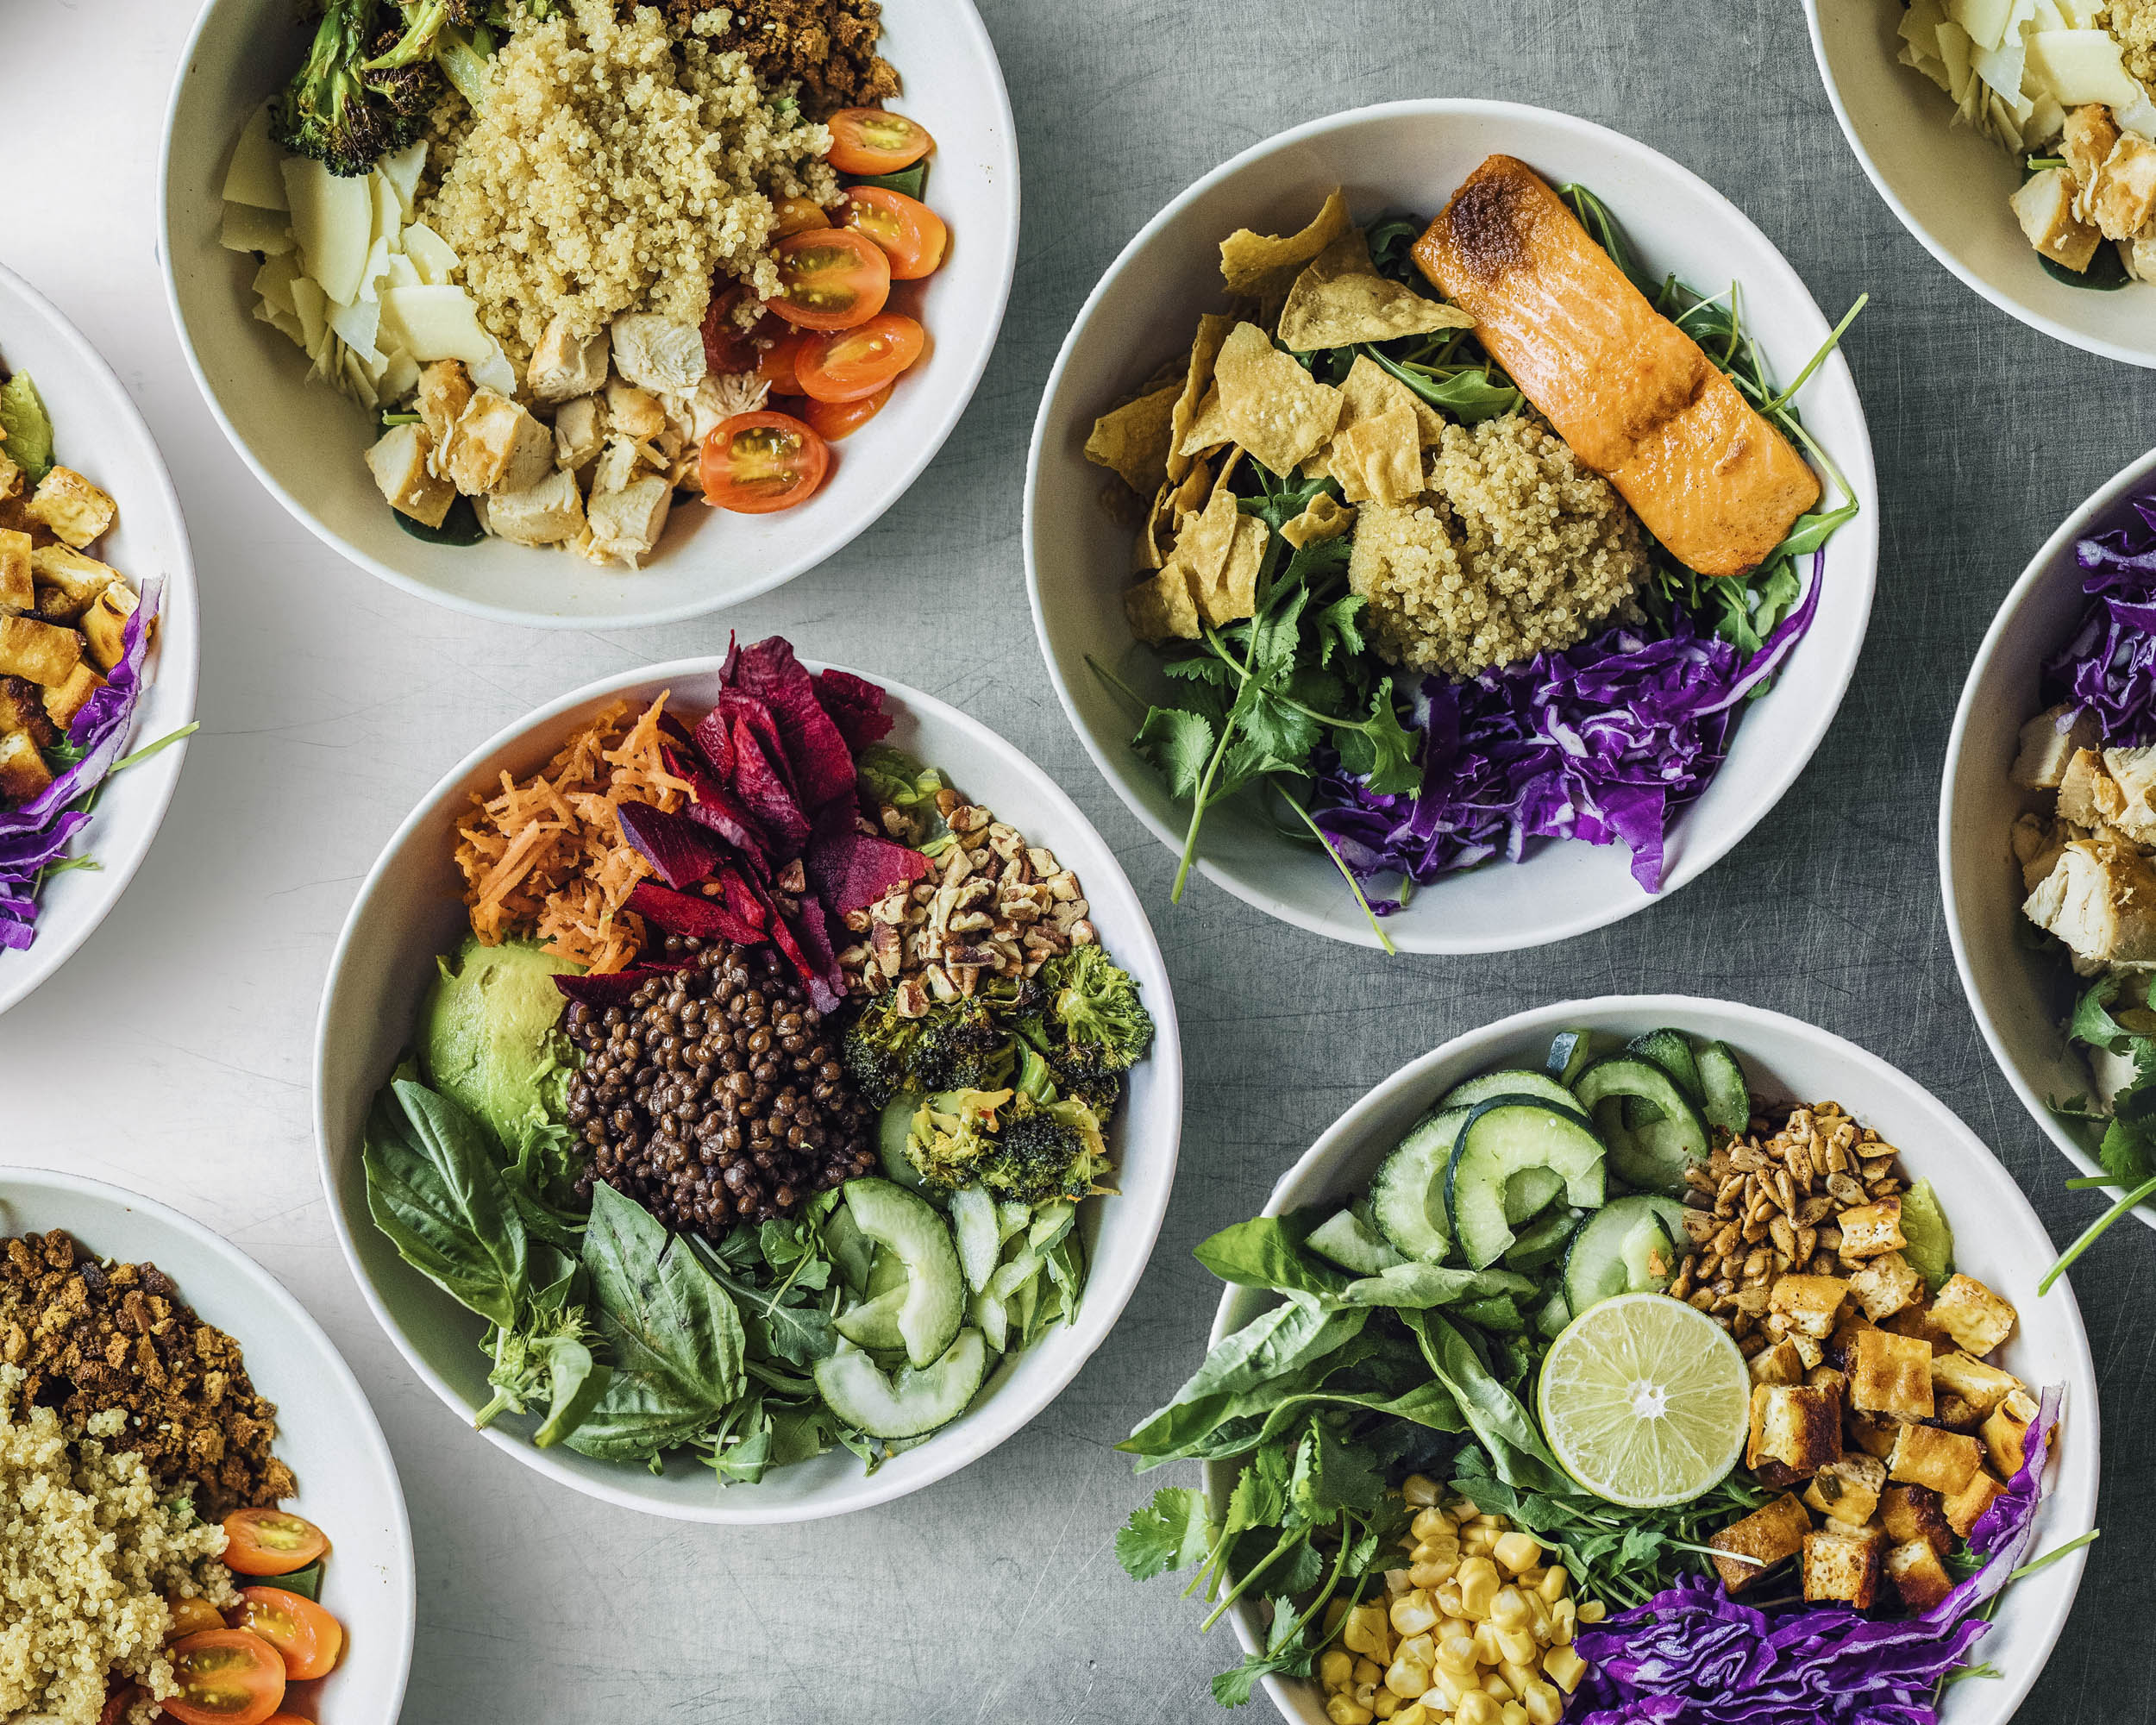 Image for The Top 10 Sweetgreen Locations in America.